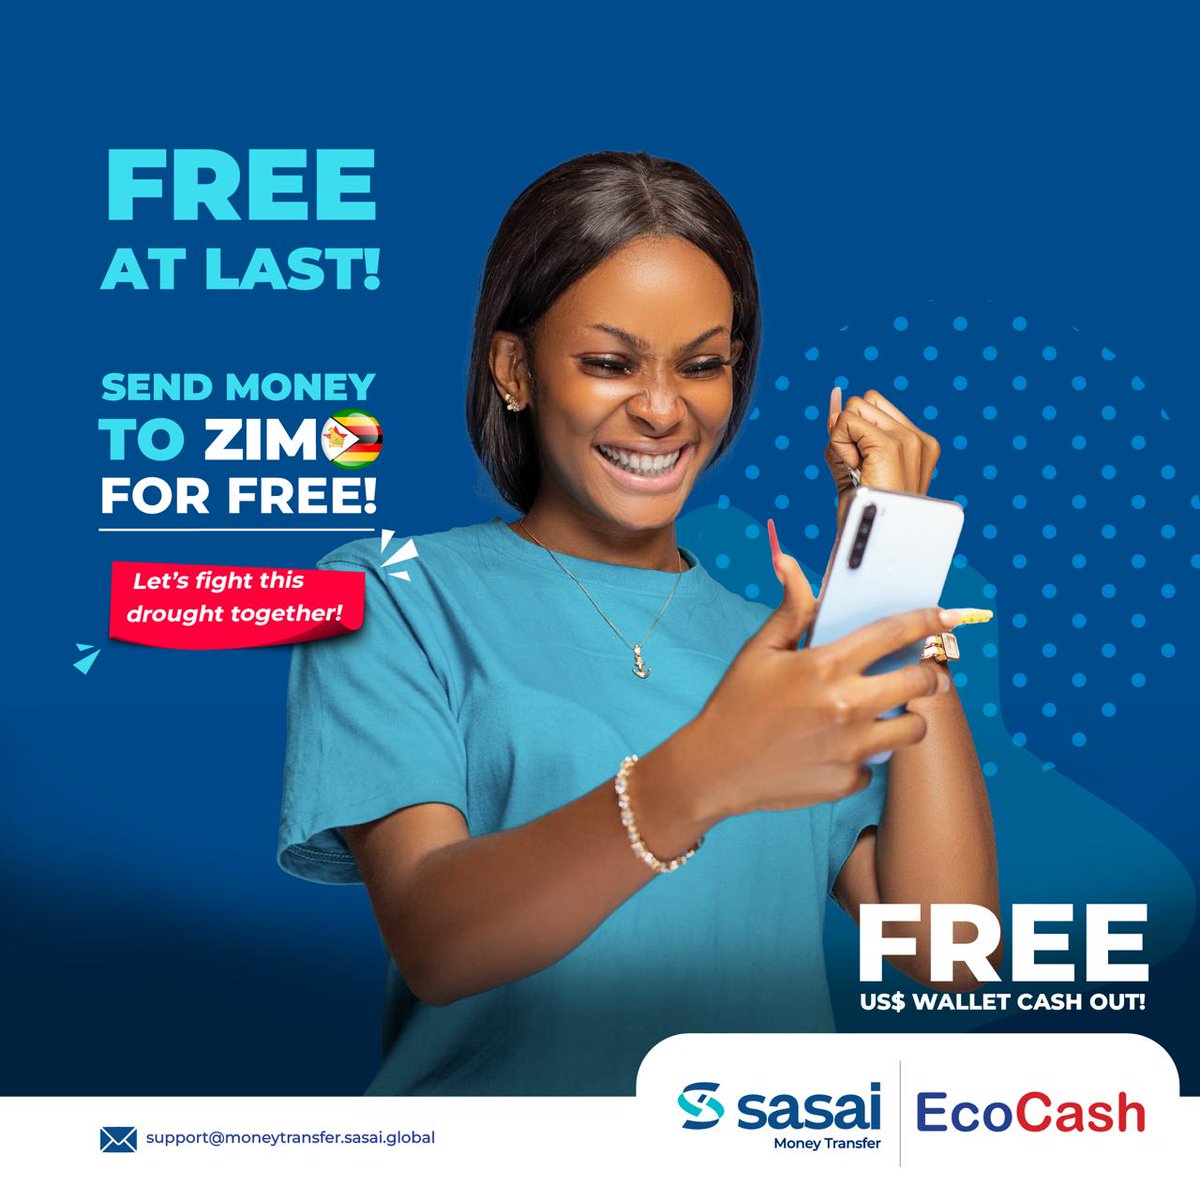 Are you in the UK n SA, send money home via Sasai money transfer into EcoCash for FREE today and your loved ones in Zim will Cash it Out for Free. #Let’s fight this drought together